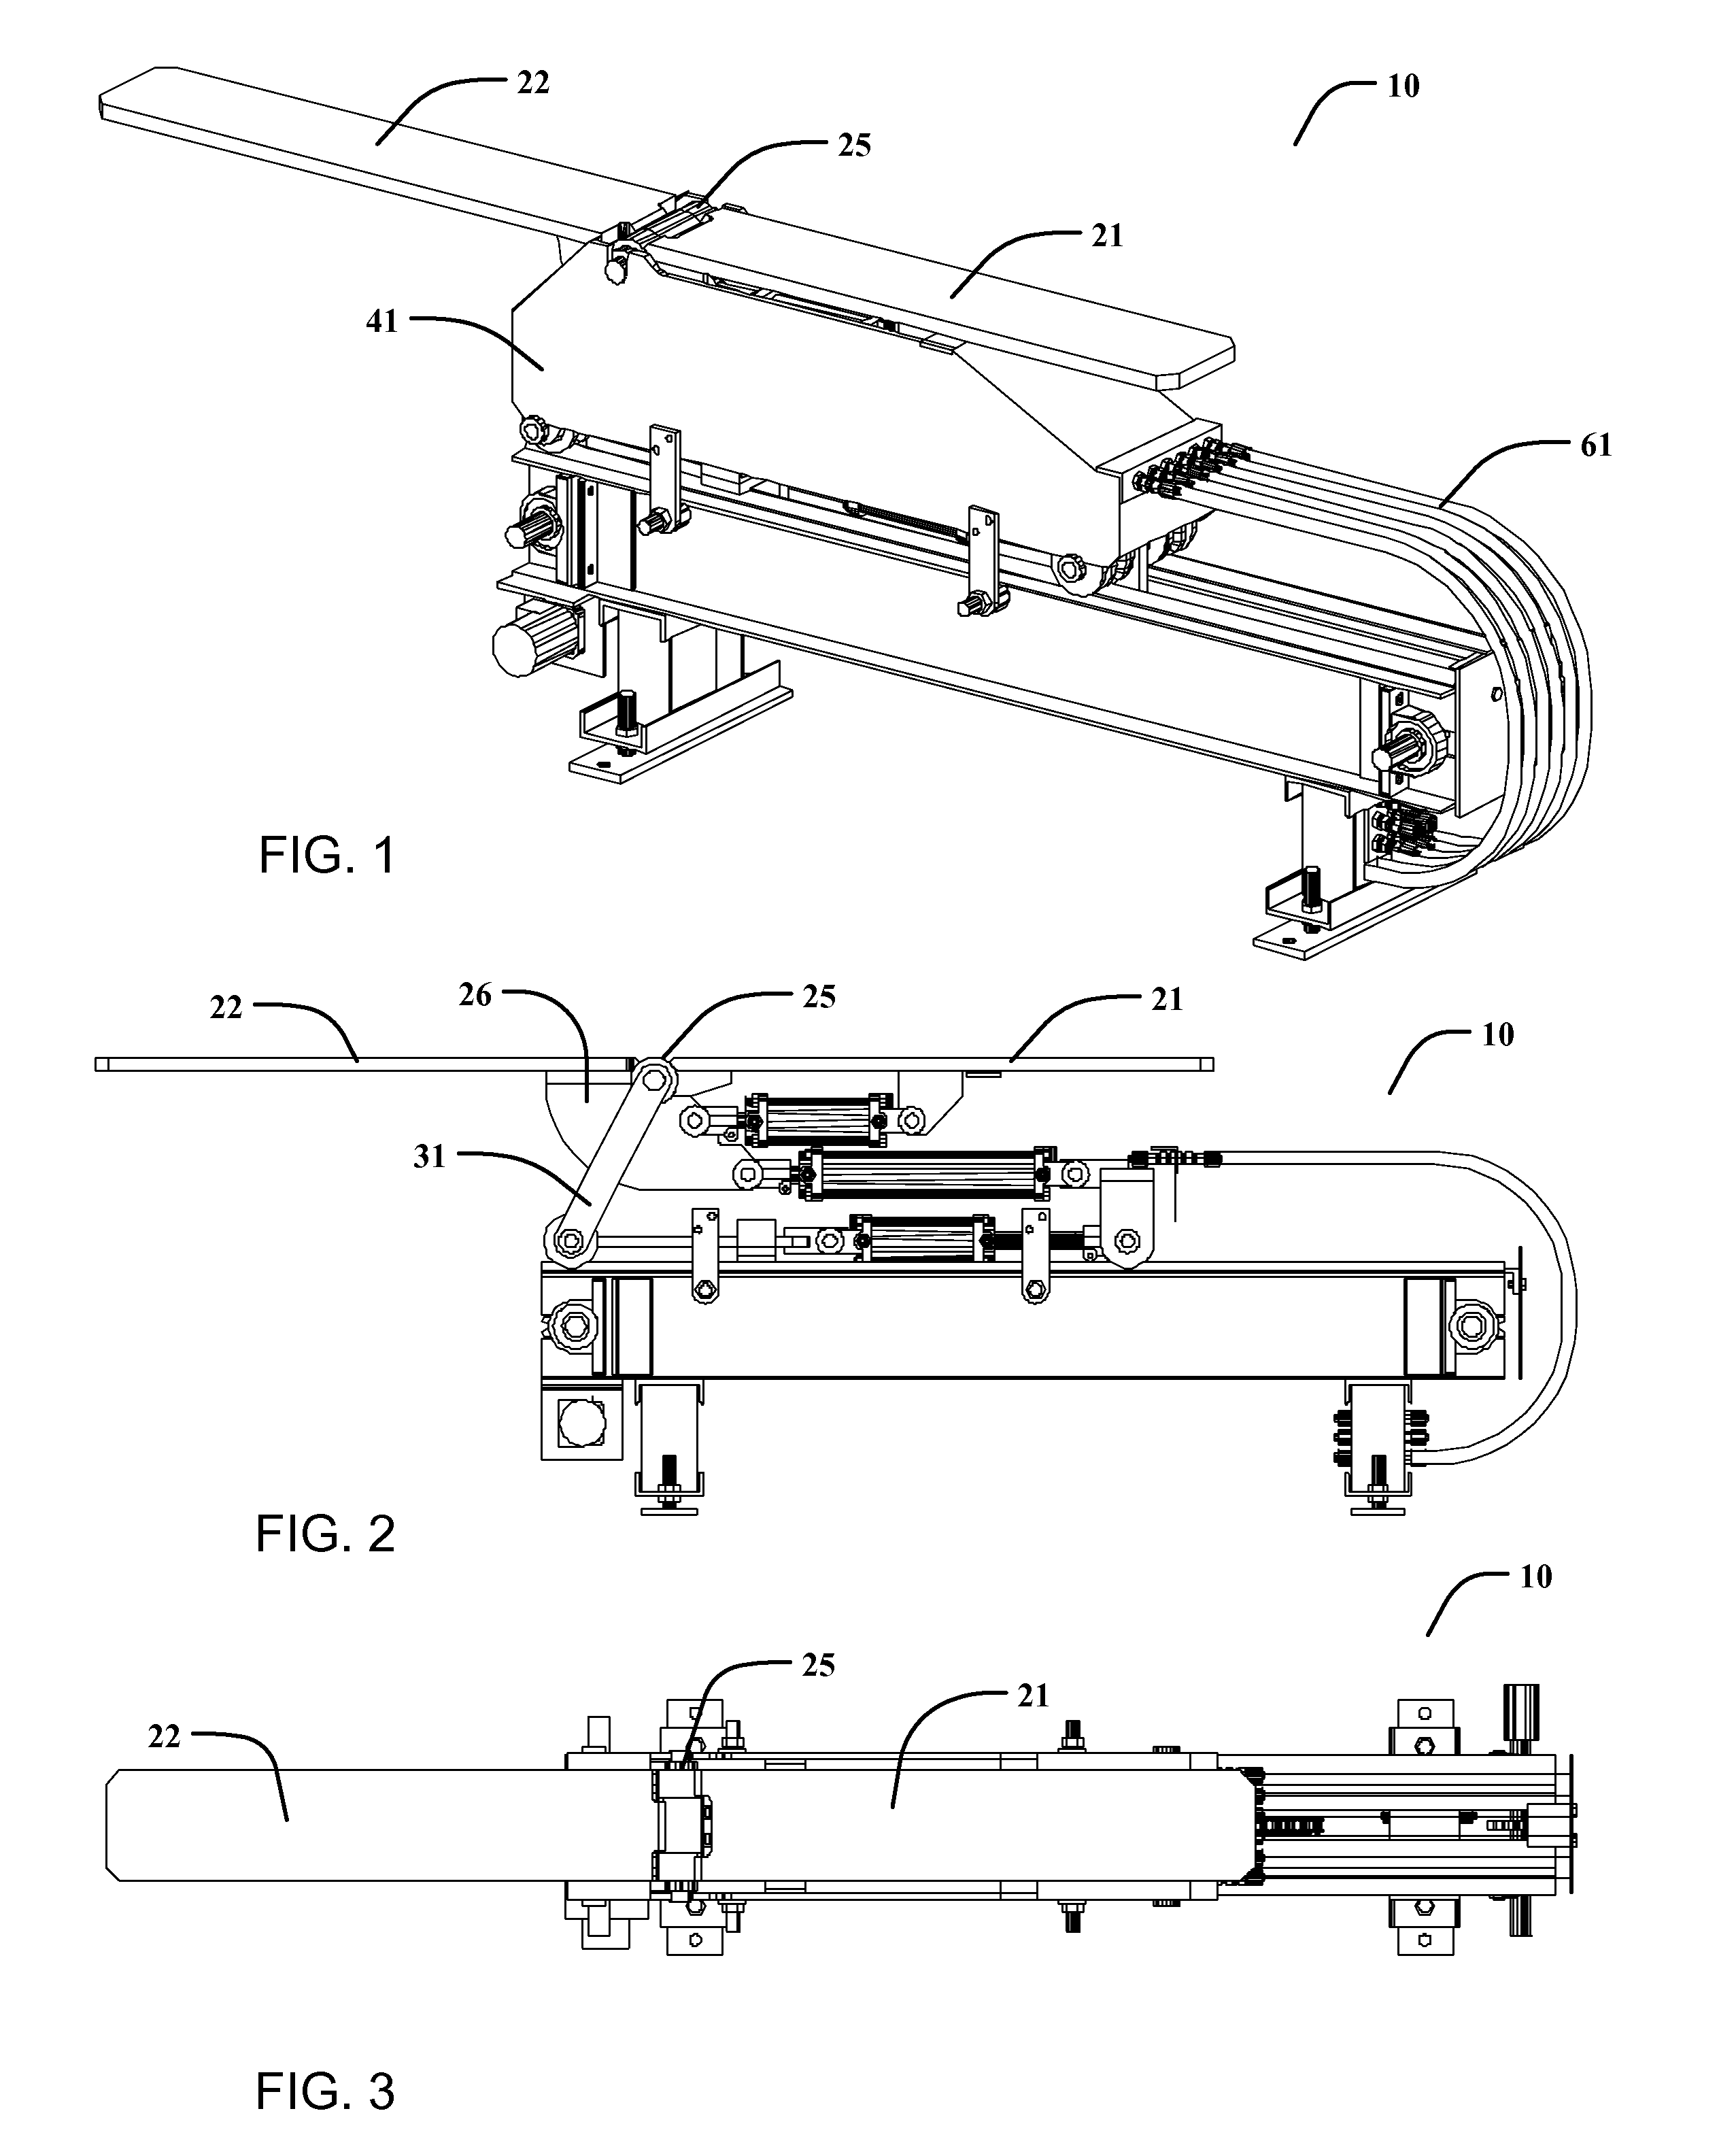 Structural Profile Rotator